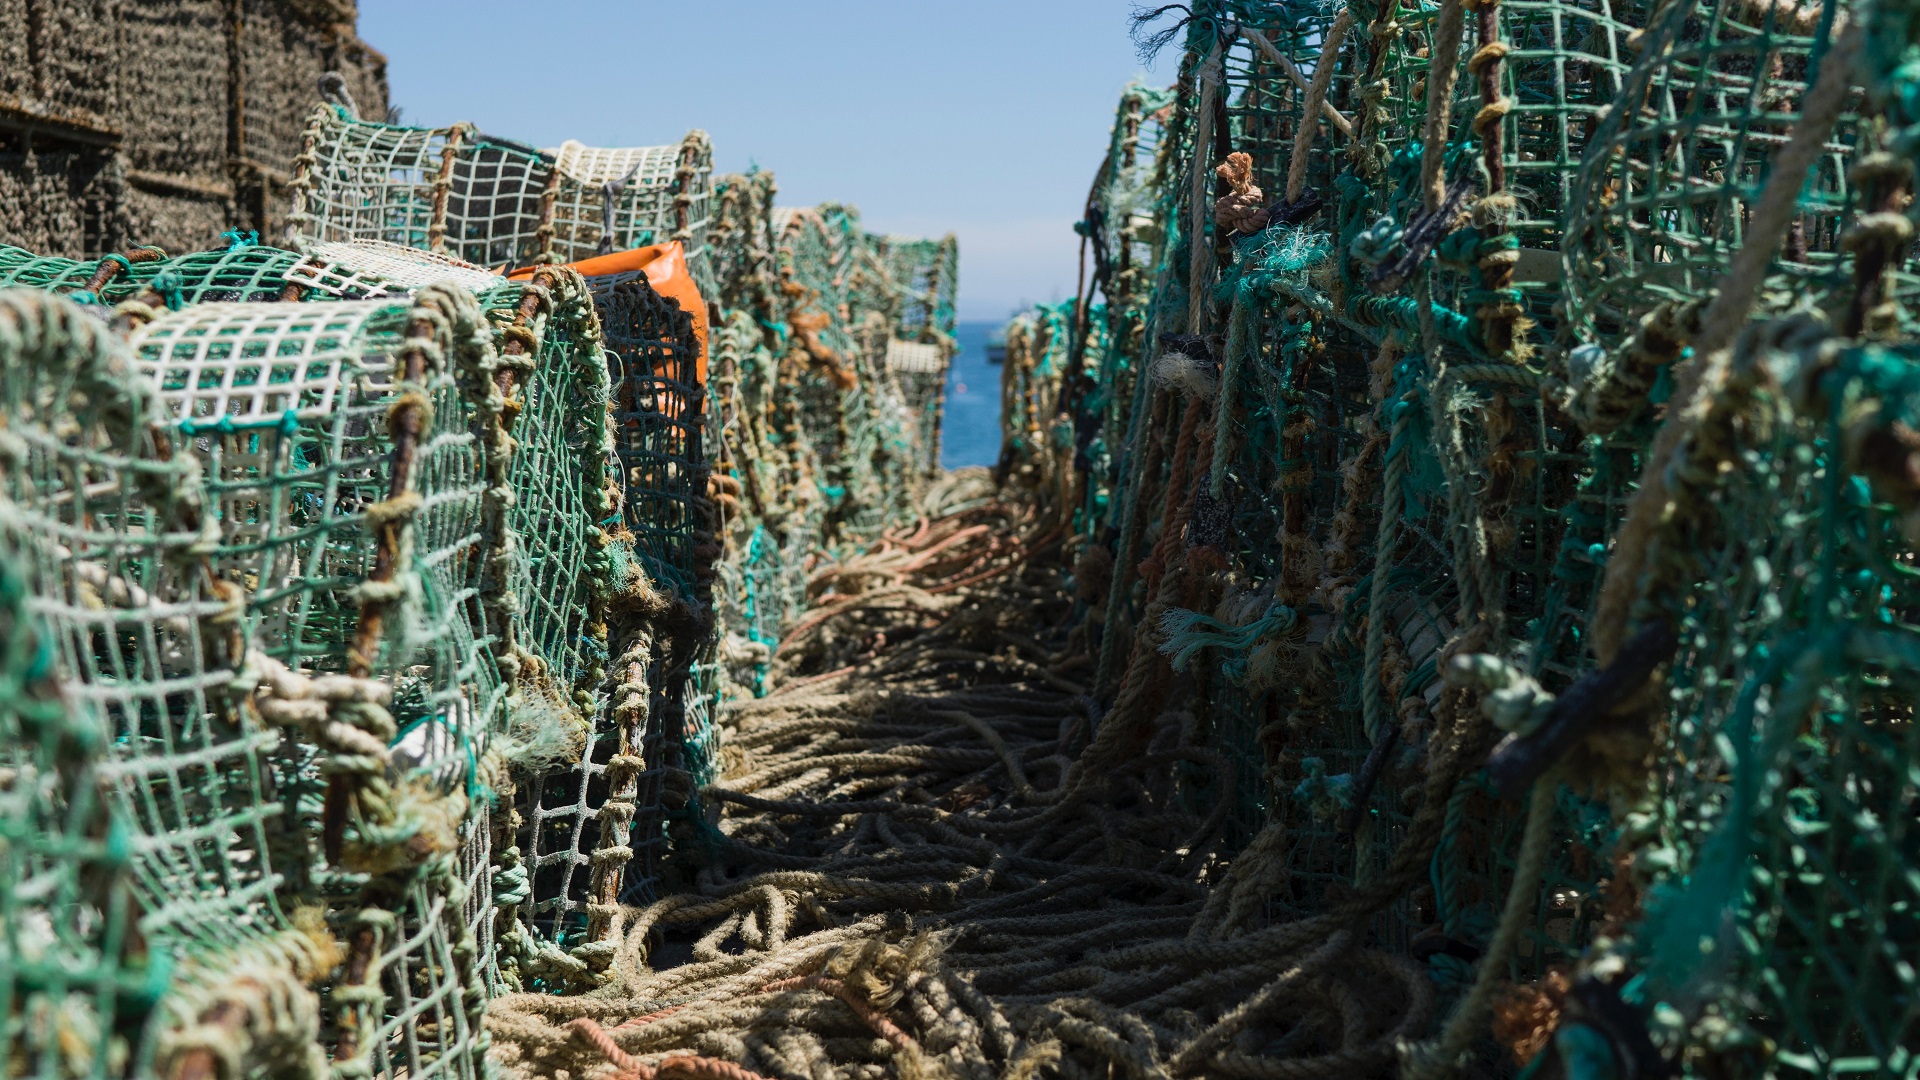 lobster pots and nets